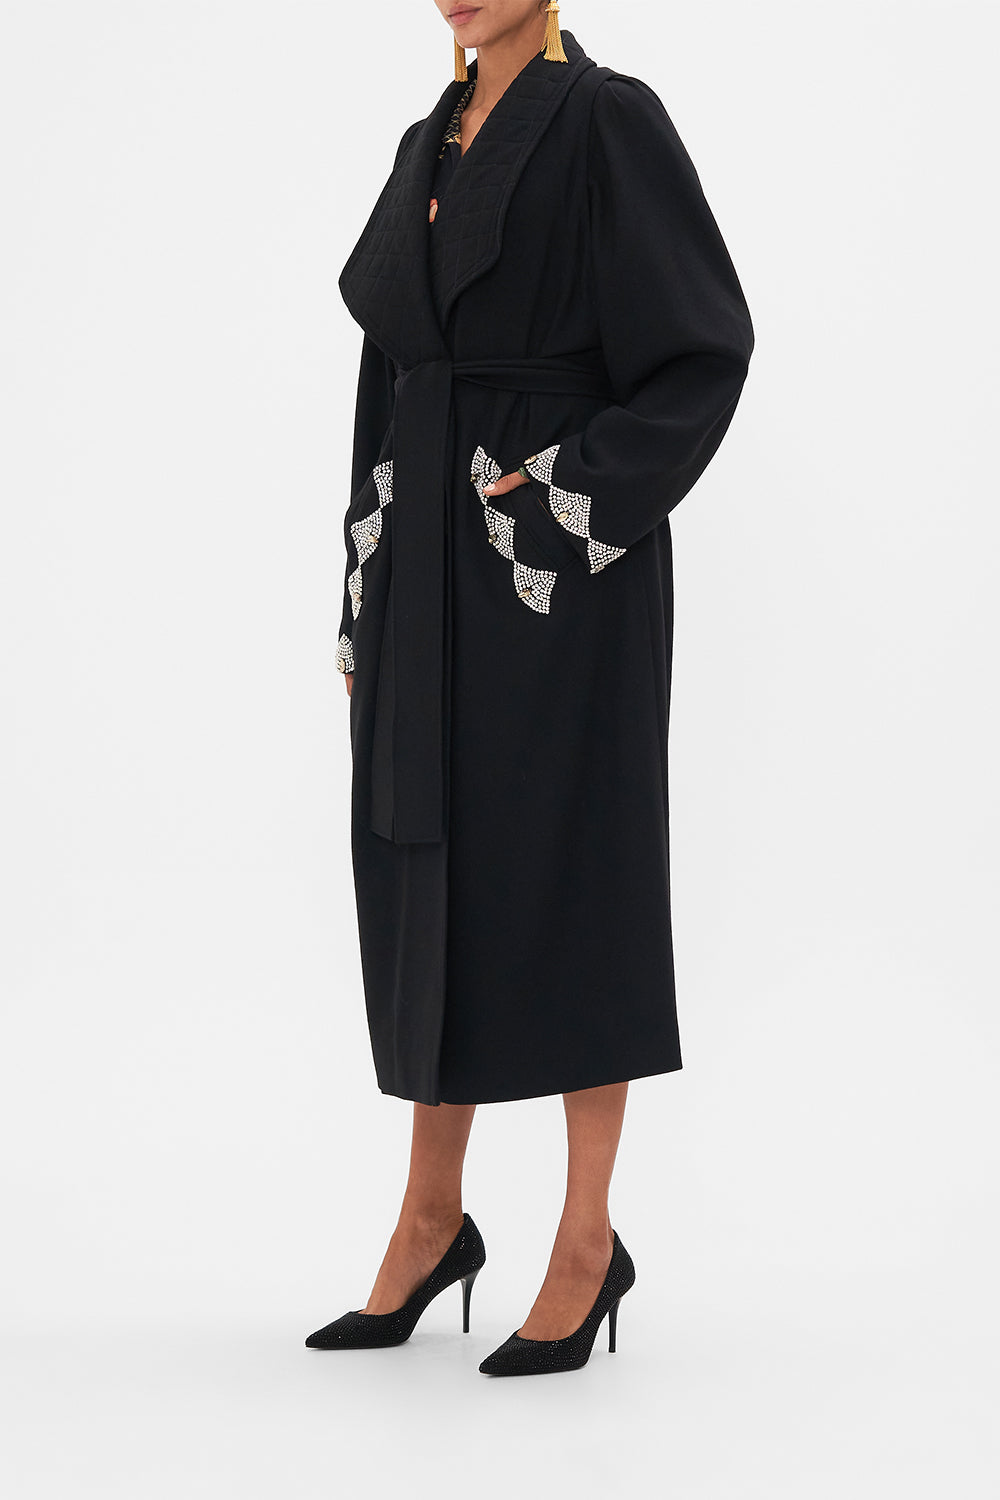 CAMILLA quilted coat in Magic in The Manuscripts print